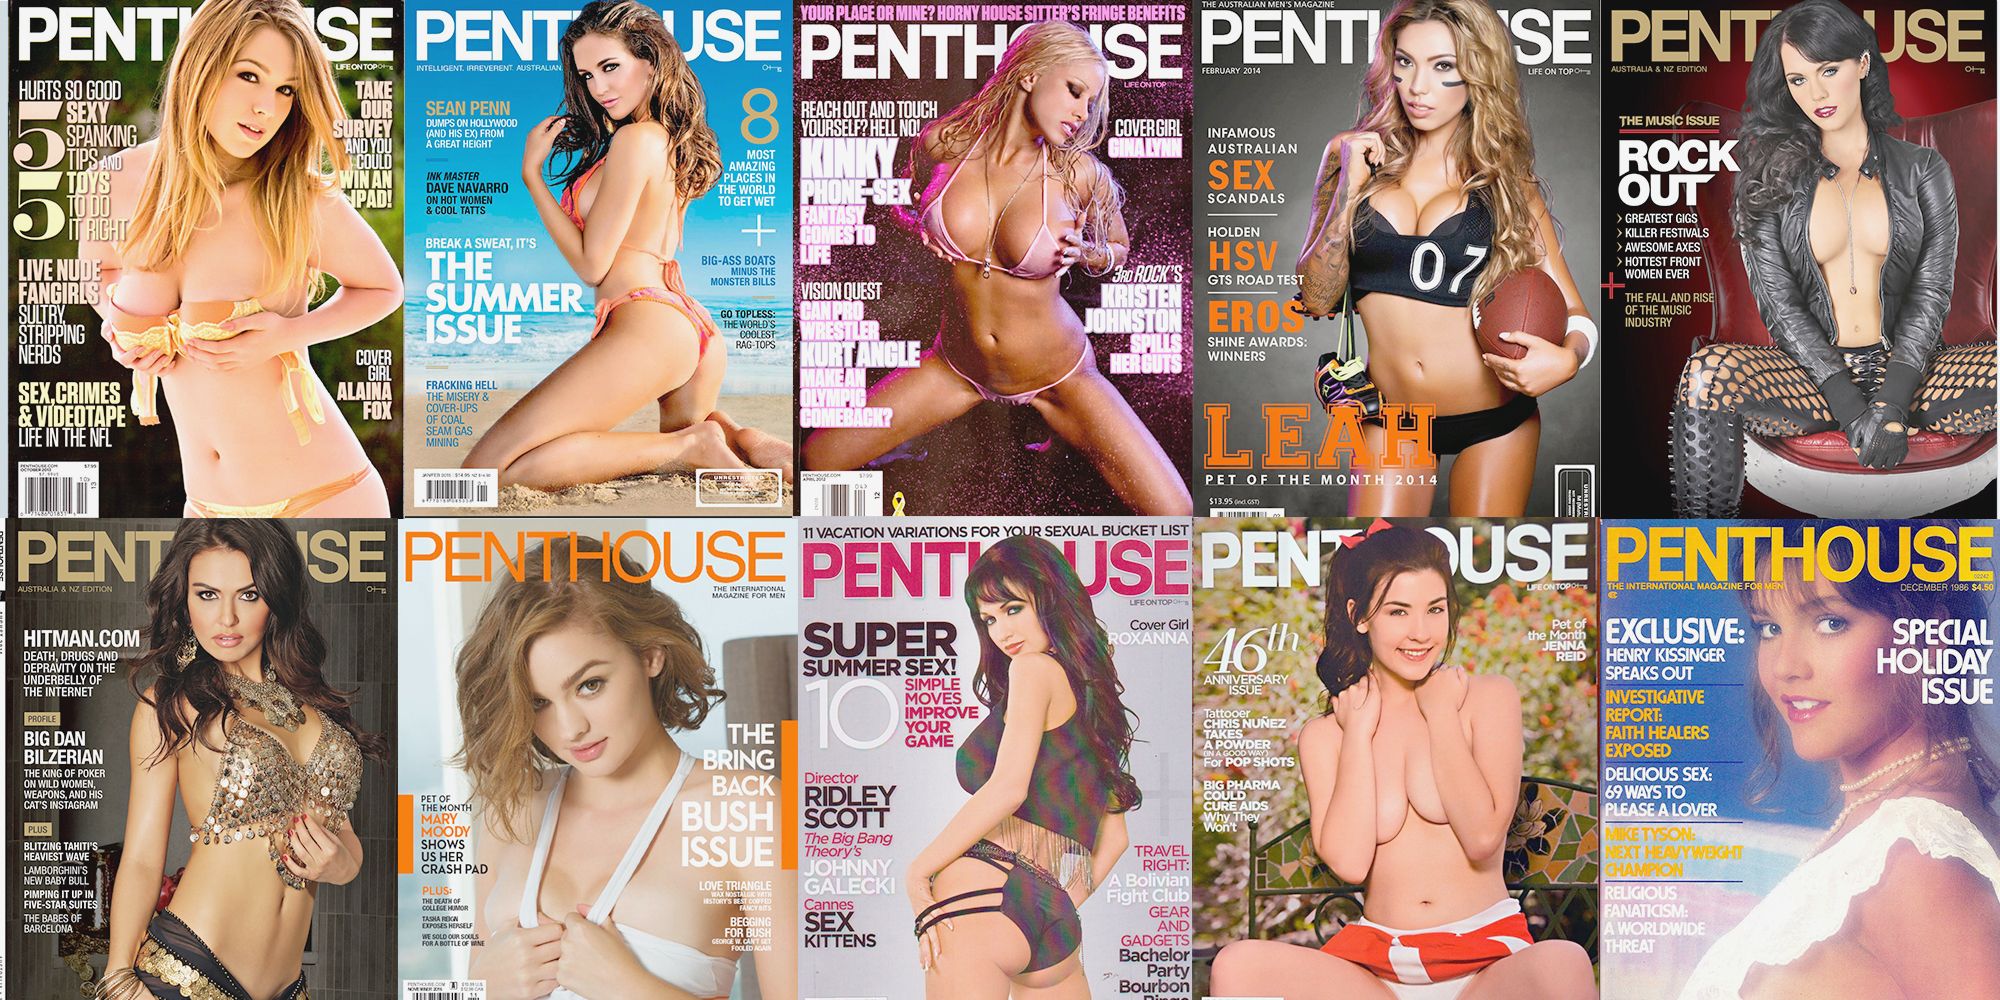 Why Penthouses Feminist CEO Will Never Ditch the Full Page Nudes